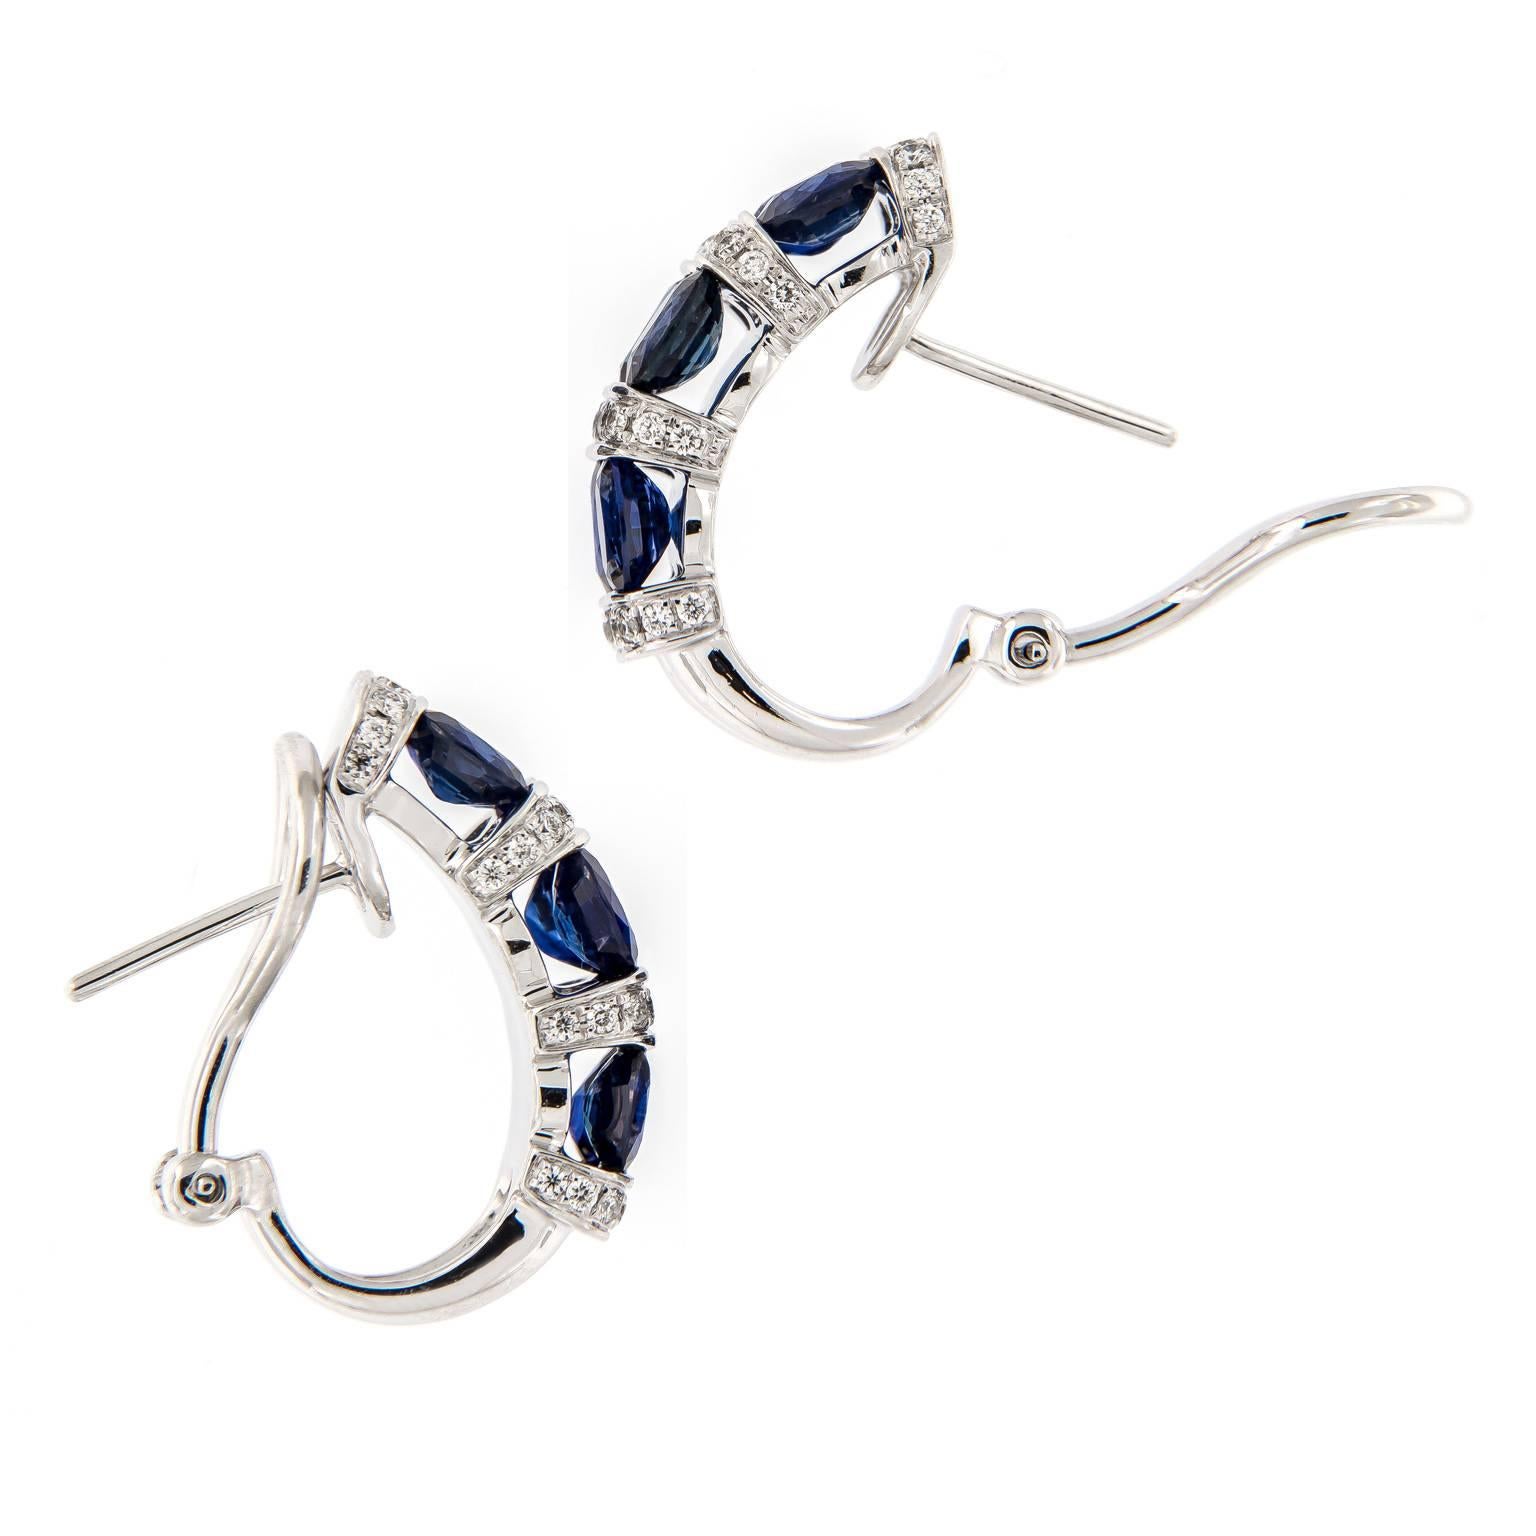 Alternate rows of contrasting mixture of oval sapphires and pave set diamonds create a stunning look. Earrings are crafted in 18k white gold.

Saphires 4.96 cttw
Diamonds 0.54 cttw